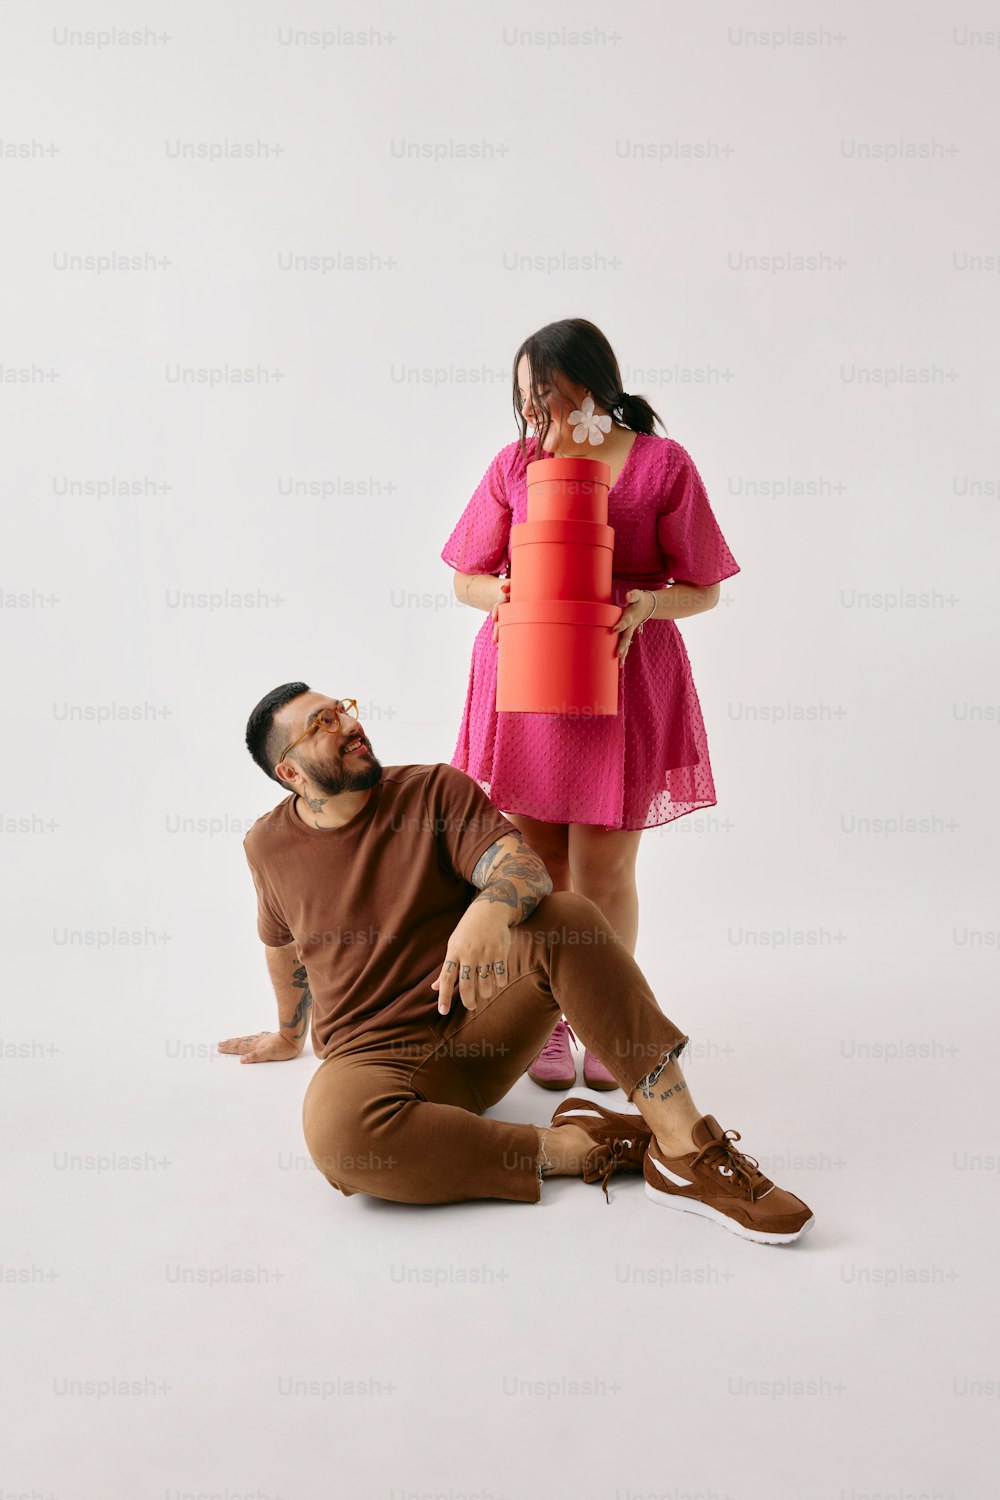 a man sitting on the ground next to a woman